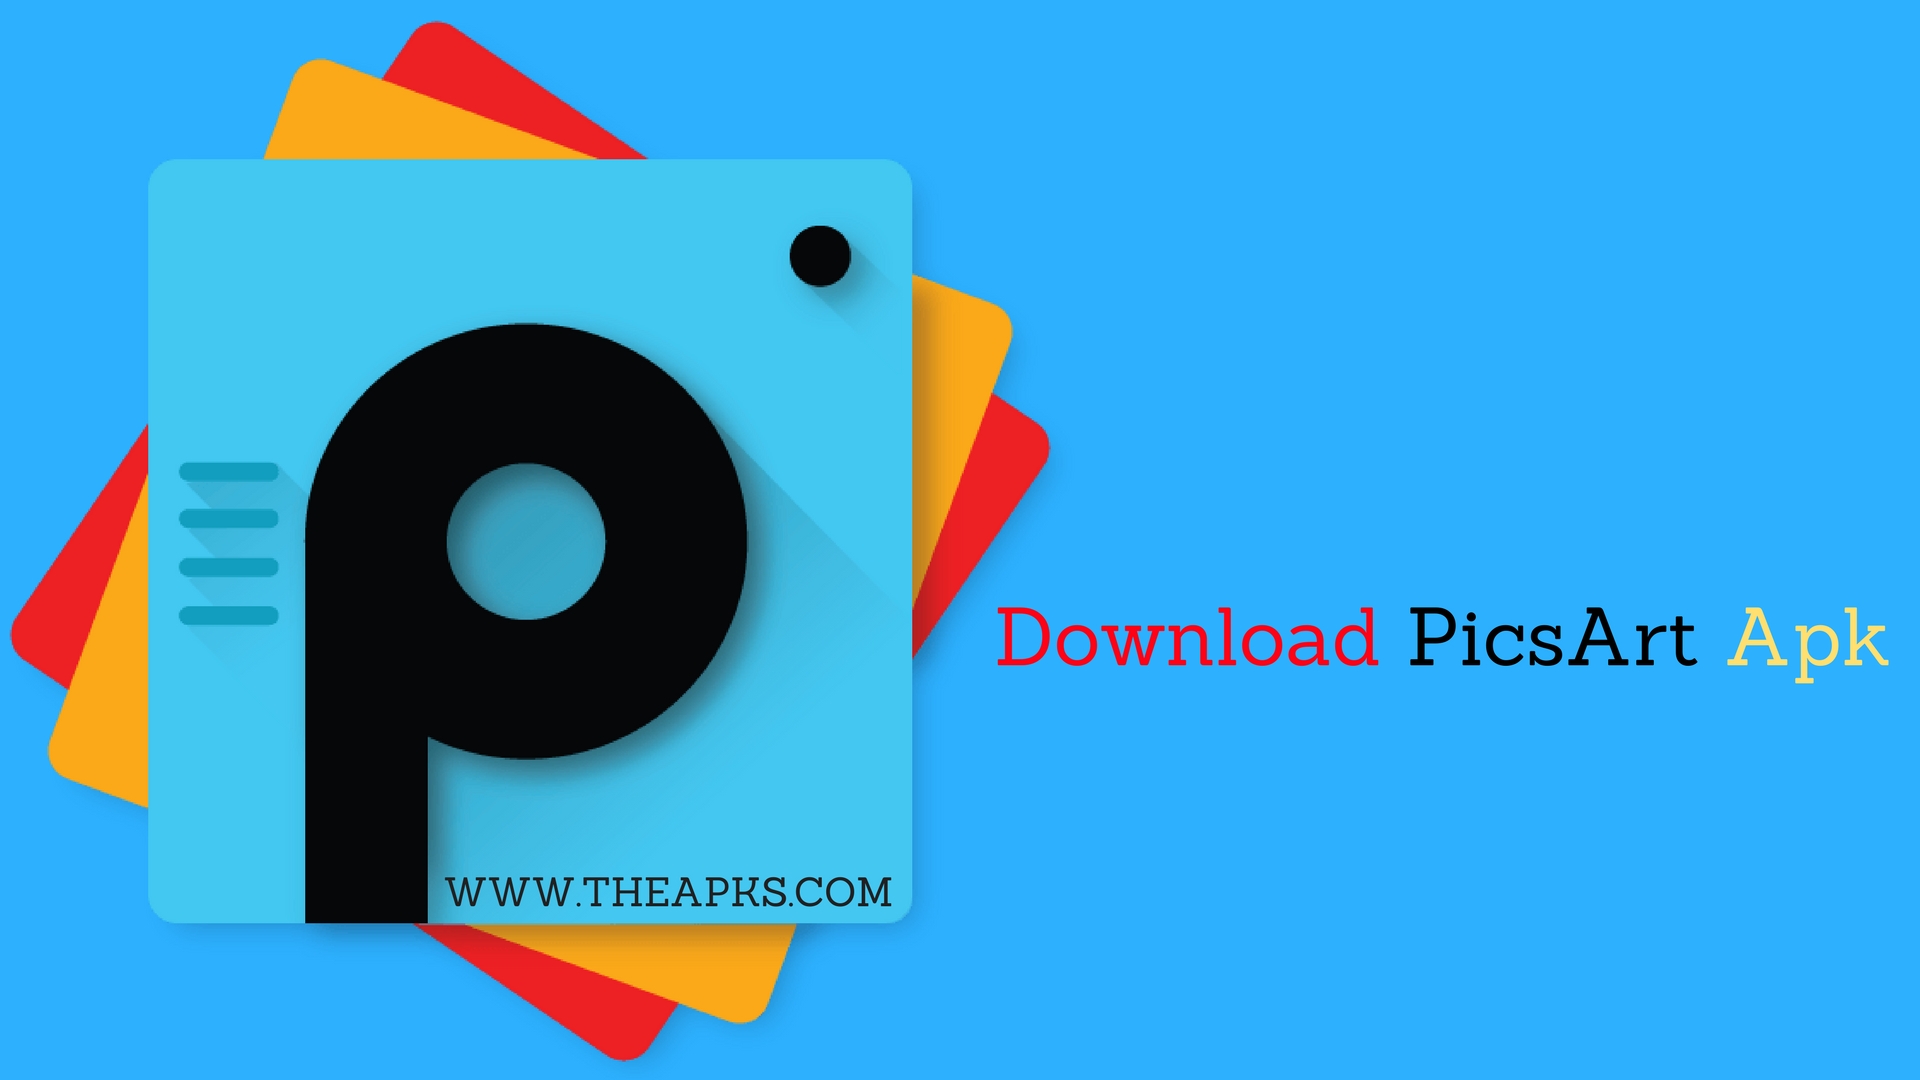 Howto How To Edit Photos In Picsart App